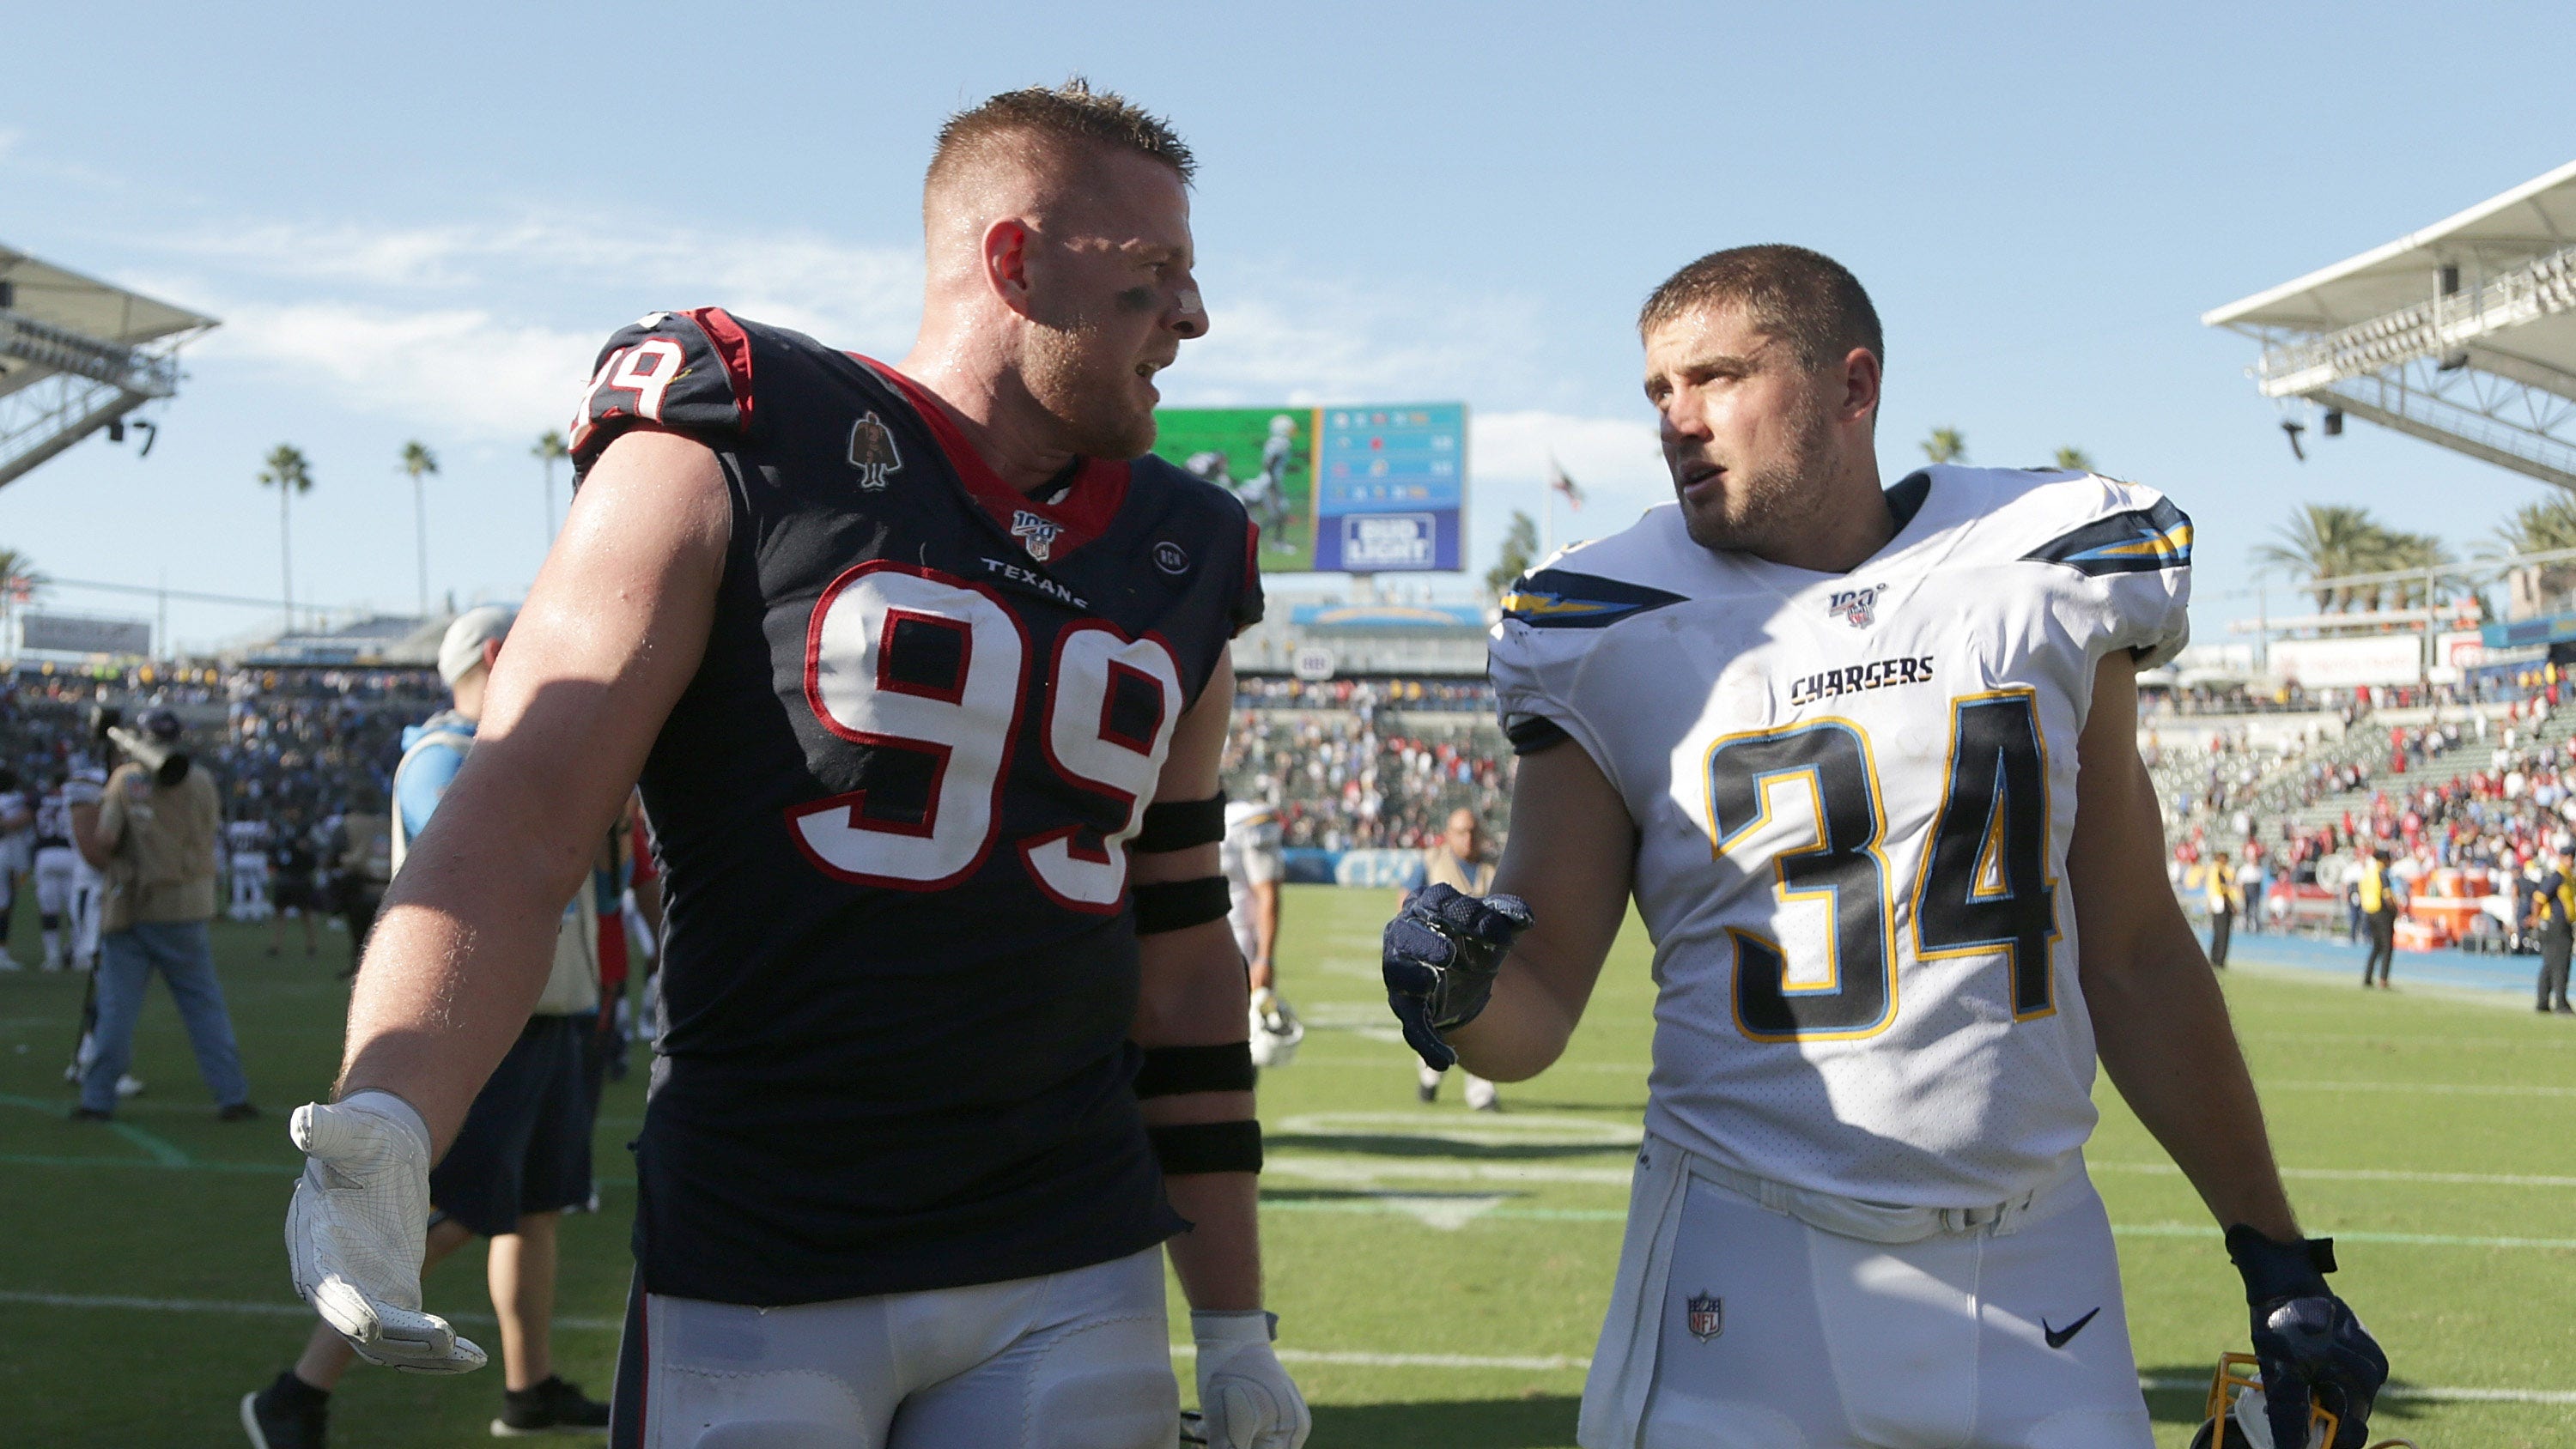 Steelers’ TJ Watt praises JJ Watt, NFL Defensive Player of the Year season doesn’t compare to brother’s ‘prime’